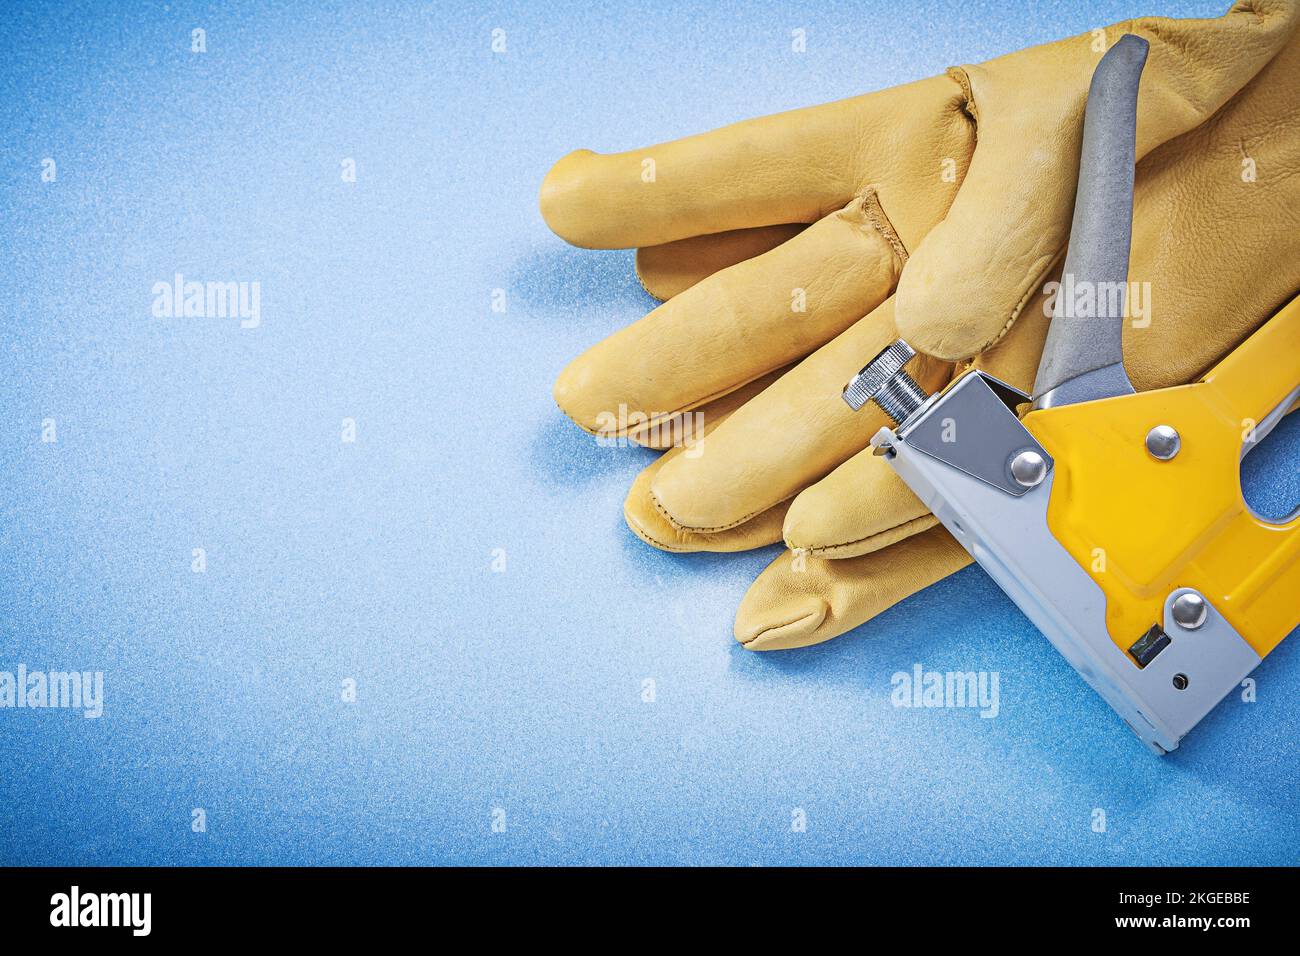 Leather protective gloves staple gun on blue background construction concept. Stock Photo